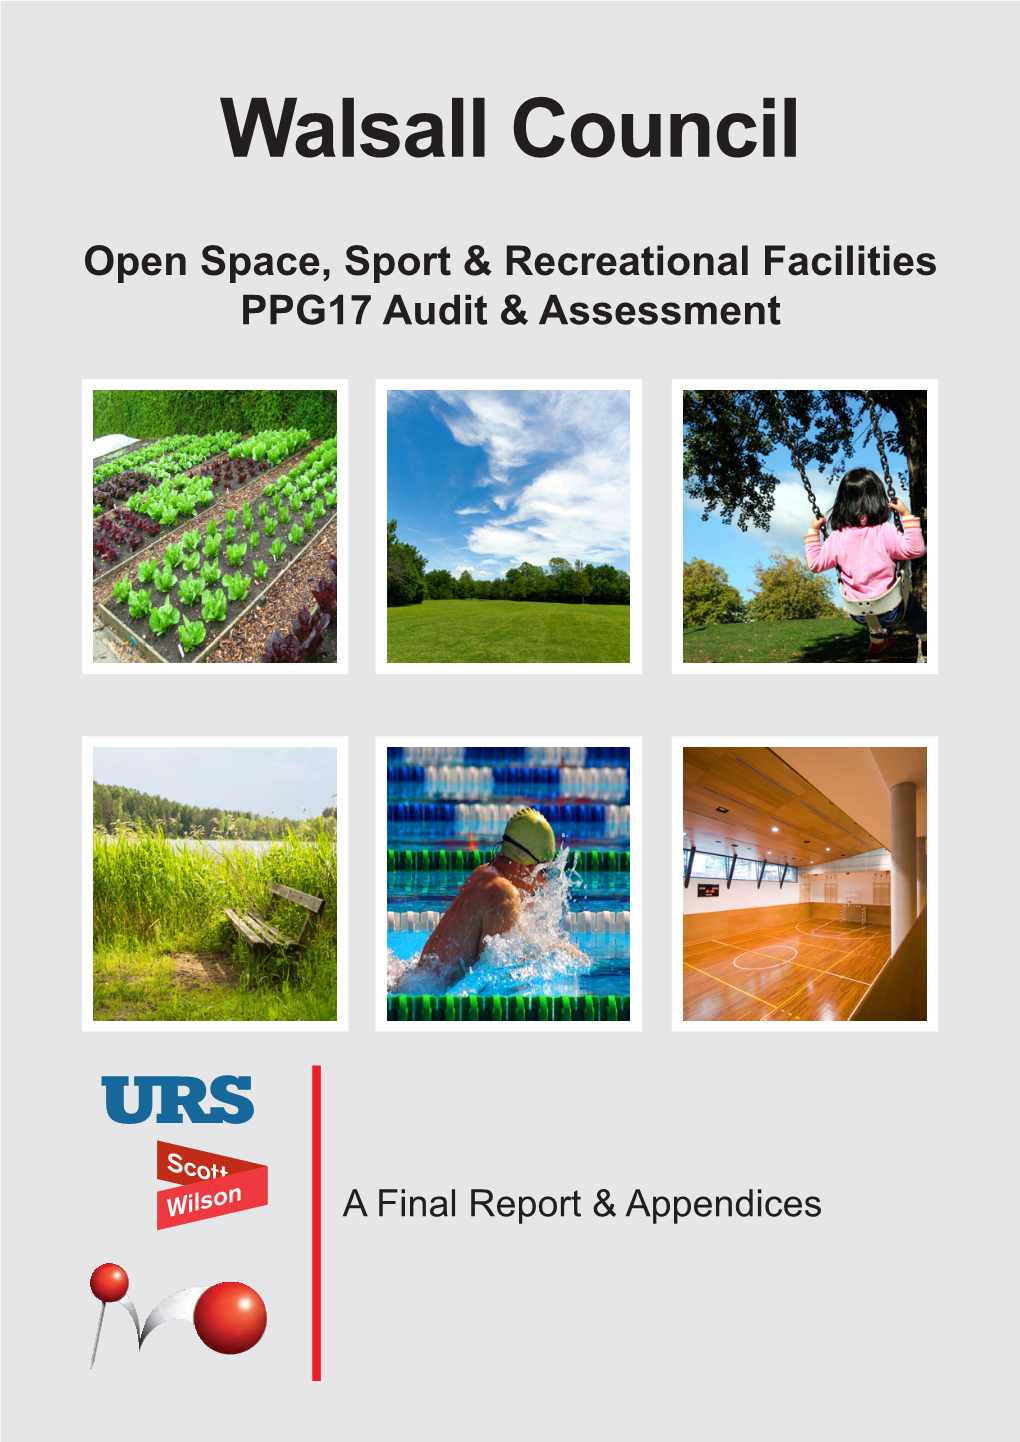 Open Space, Sport & Recreational Facilities PPG17